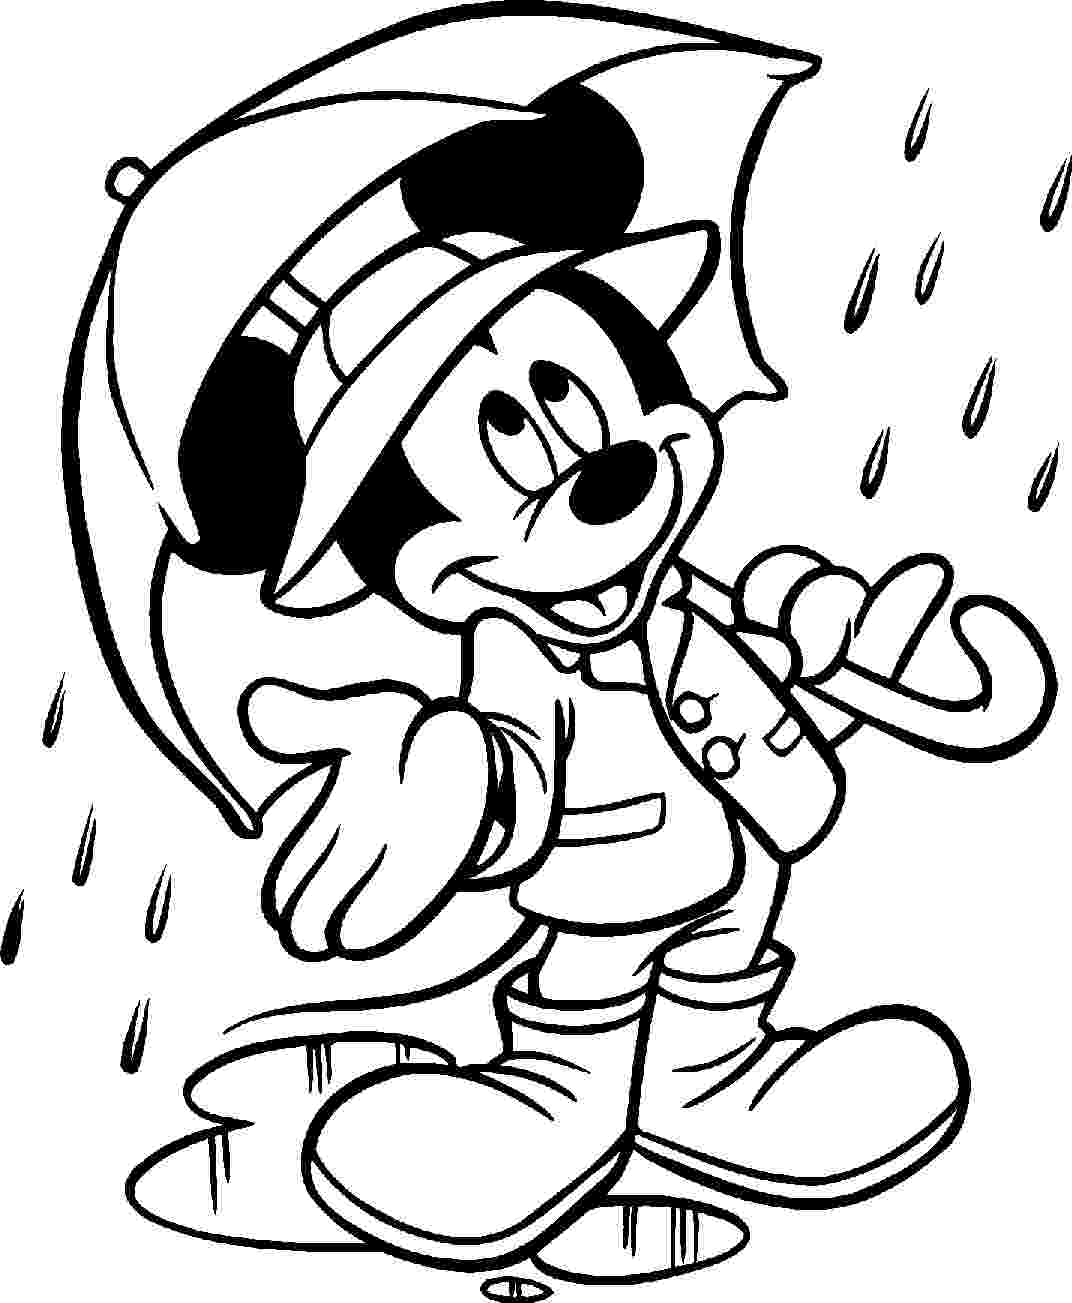 mickey mouse free coloring pages free coloring pages for kids disney coloring pages free pages mickey coloring mouse 